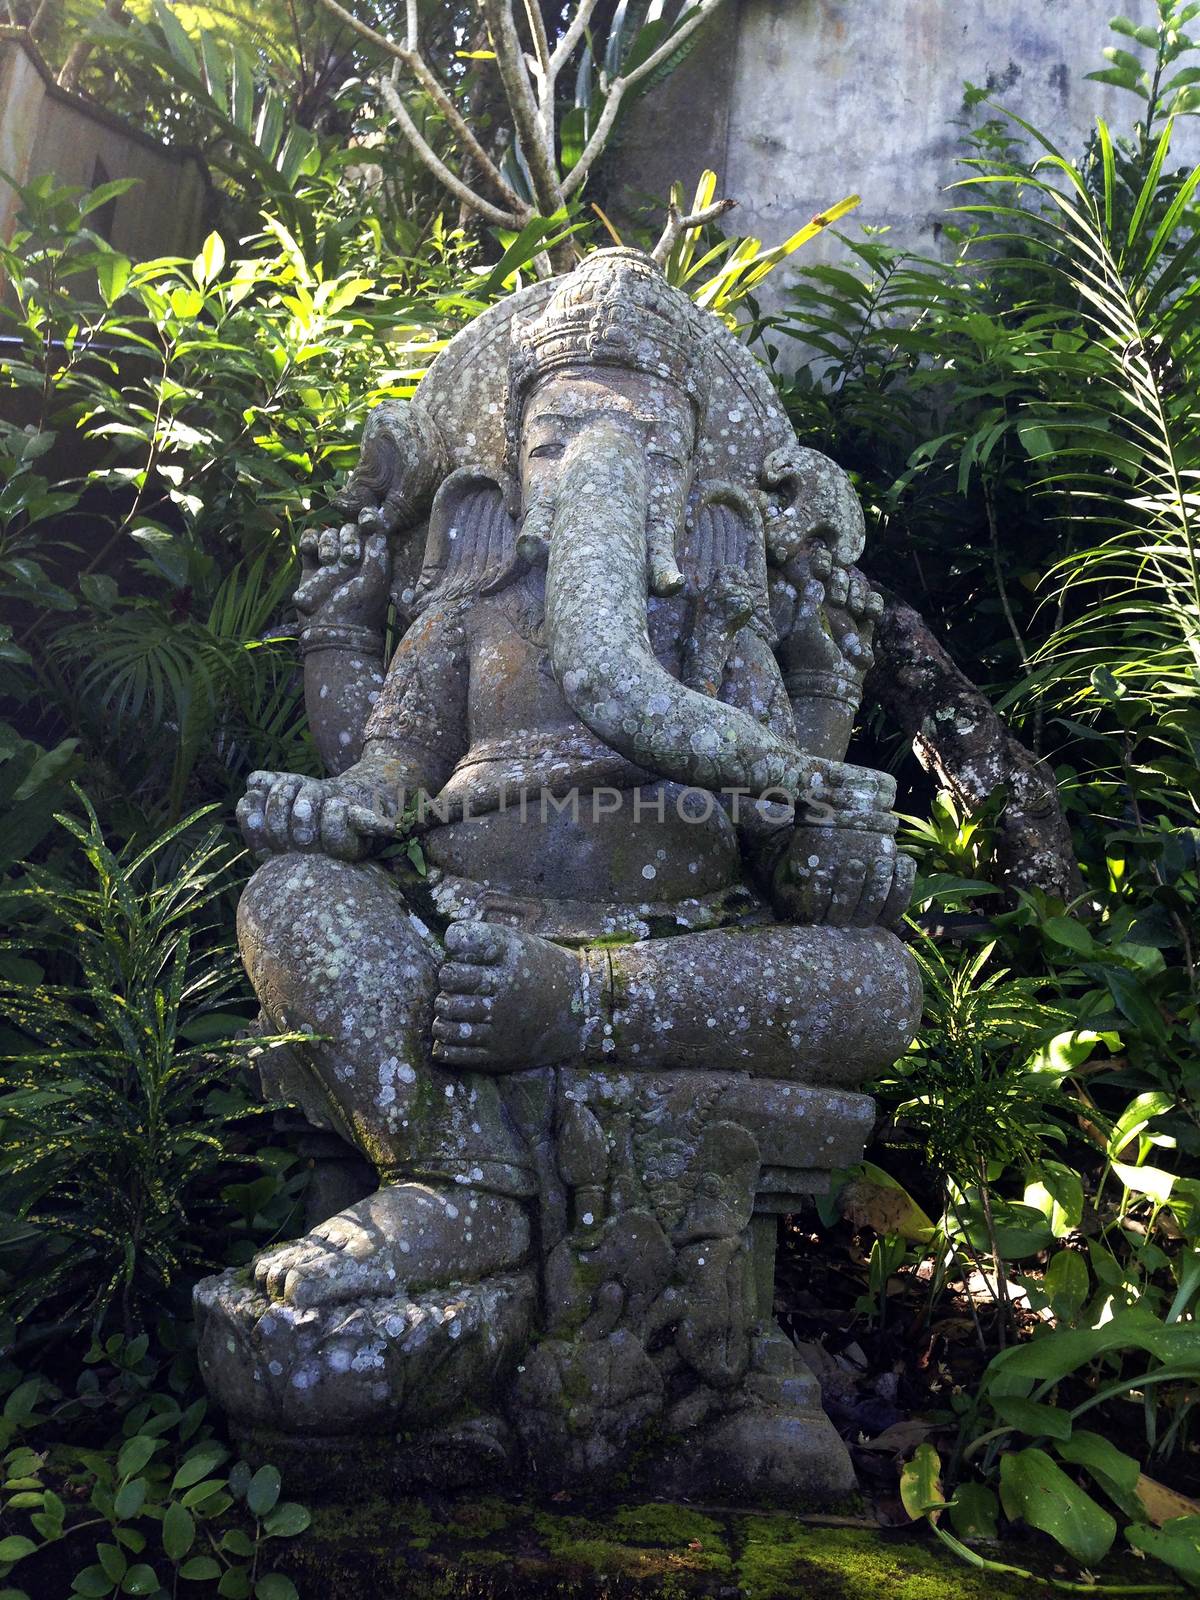 I discovered this statue when i was hiking trough a larger part of a rainforest at Bali. It was placed at a opening within trees, but hidden for the casual hiker. Stumbled upon this as i was looking for motives.
The doorkeeper, Ganesh. He is the Lord of success and destroyer of evils and obstacles. He is also worshipped as the god of education, knowledge, wisdom and wealth.